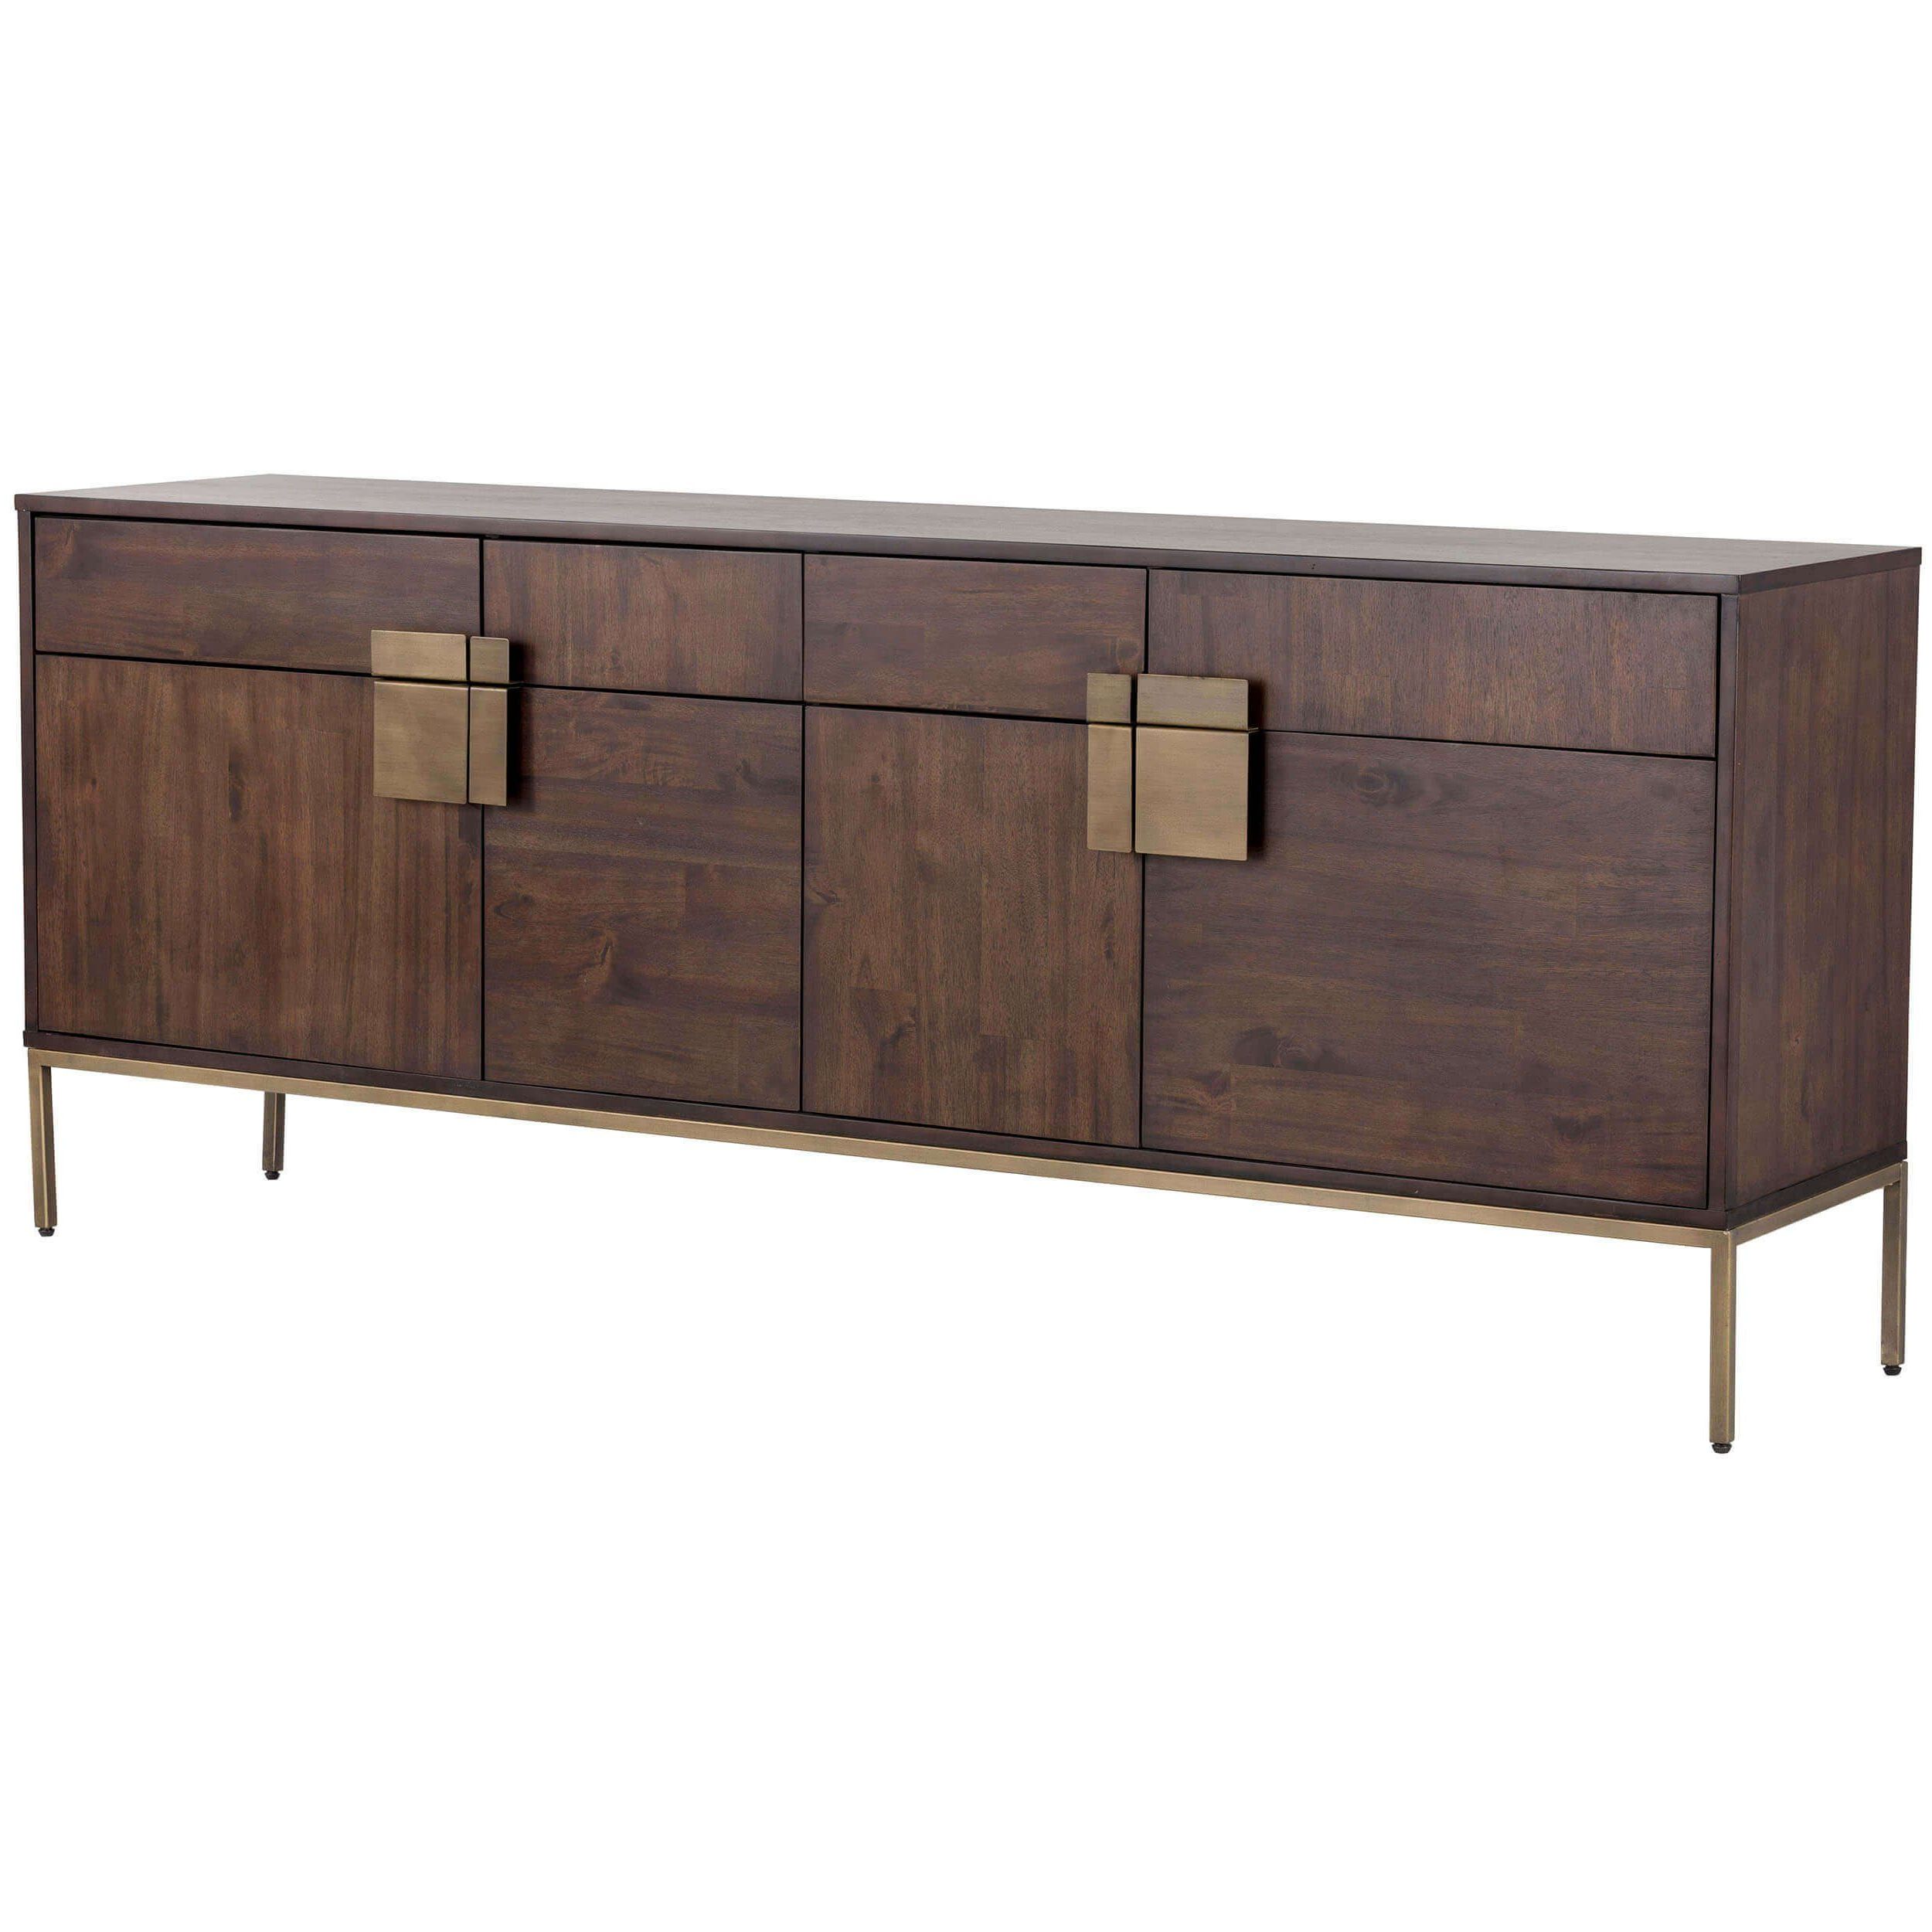 Jade Sideboard In 2019 | Furniture And Decor | Dining Room Intended For Ruskin Sideboards (Gallery 12 of 20)